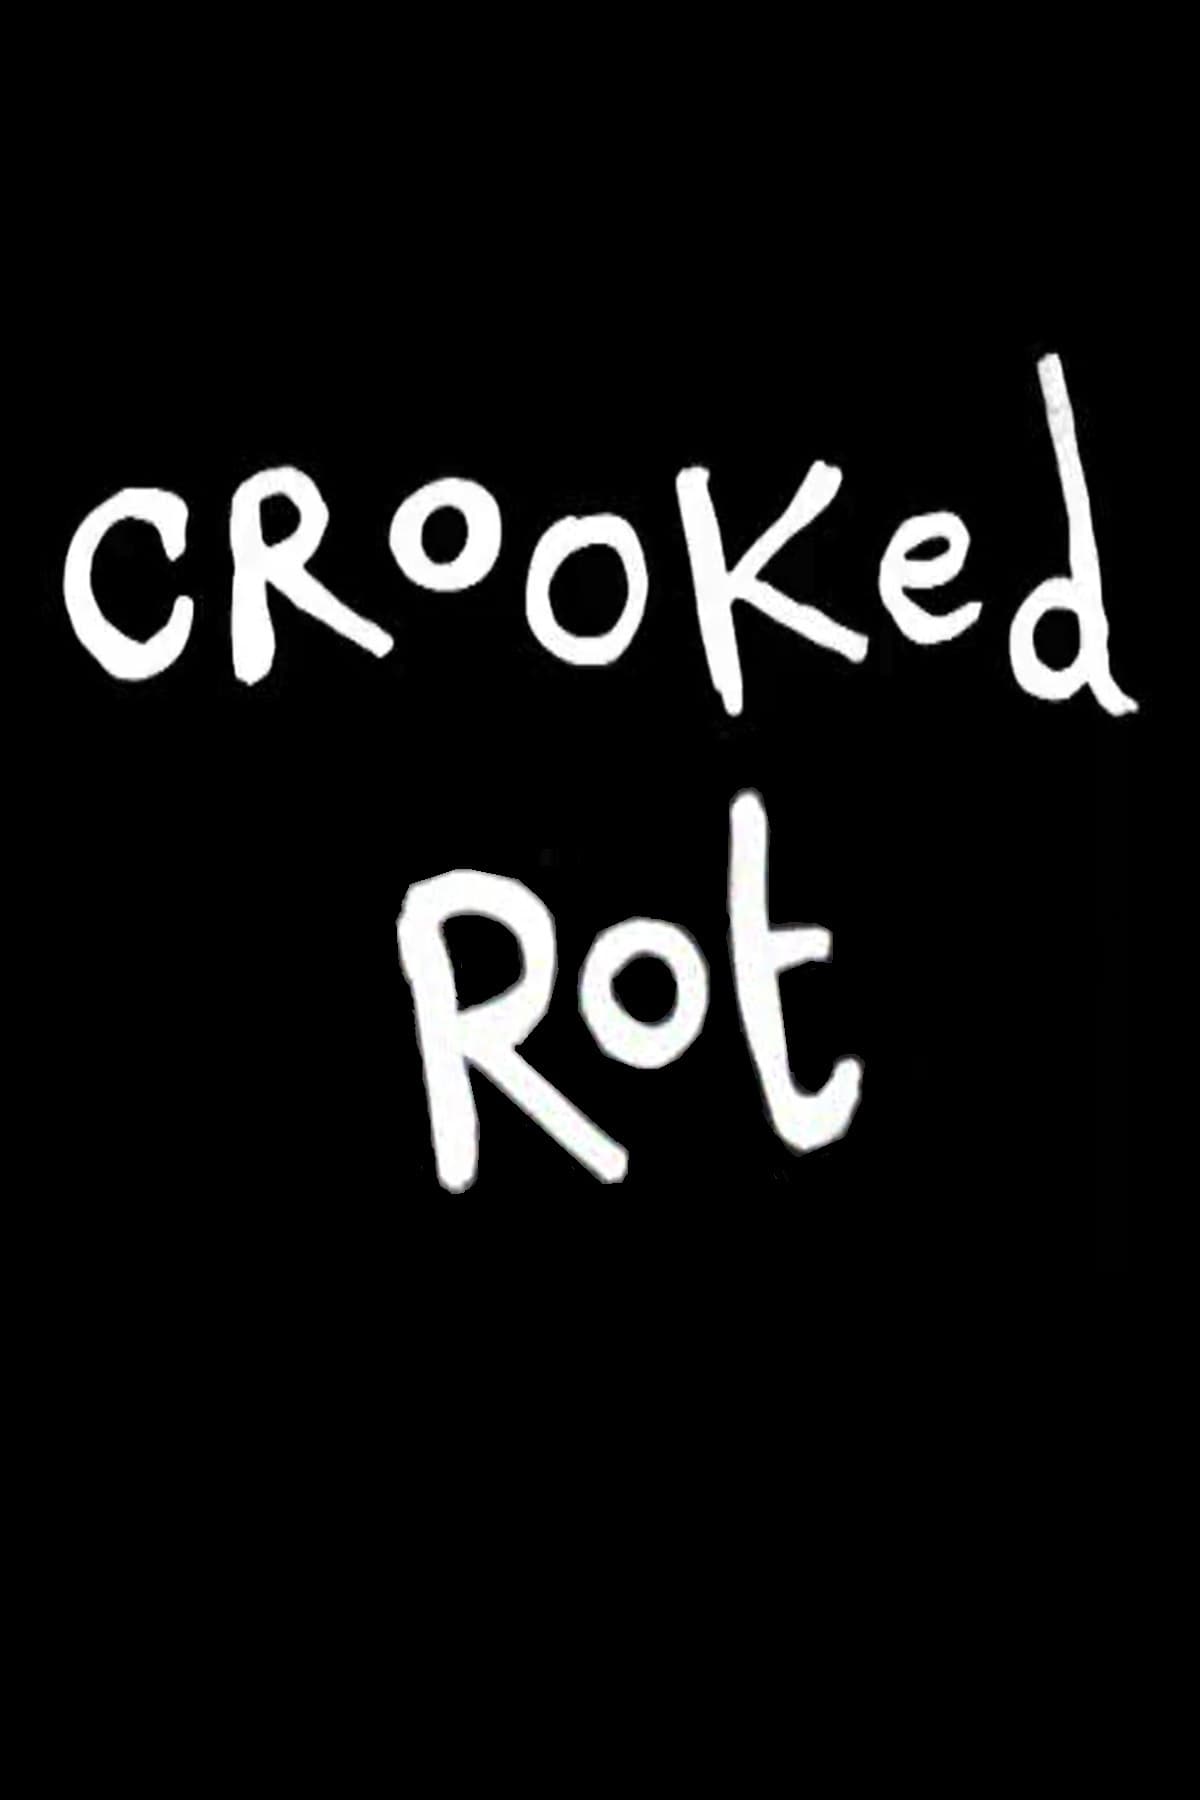 Crooked Rot